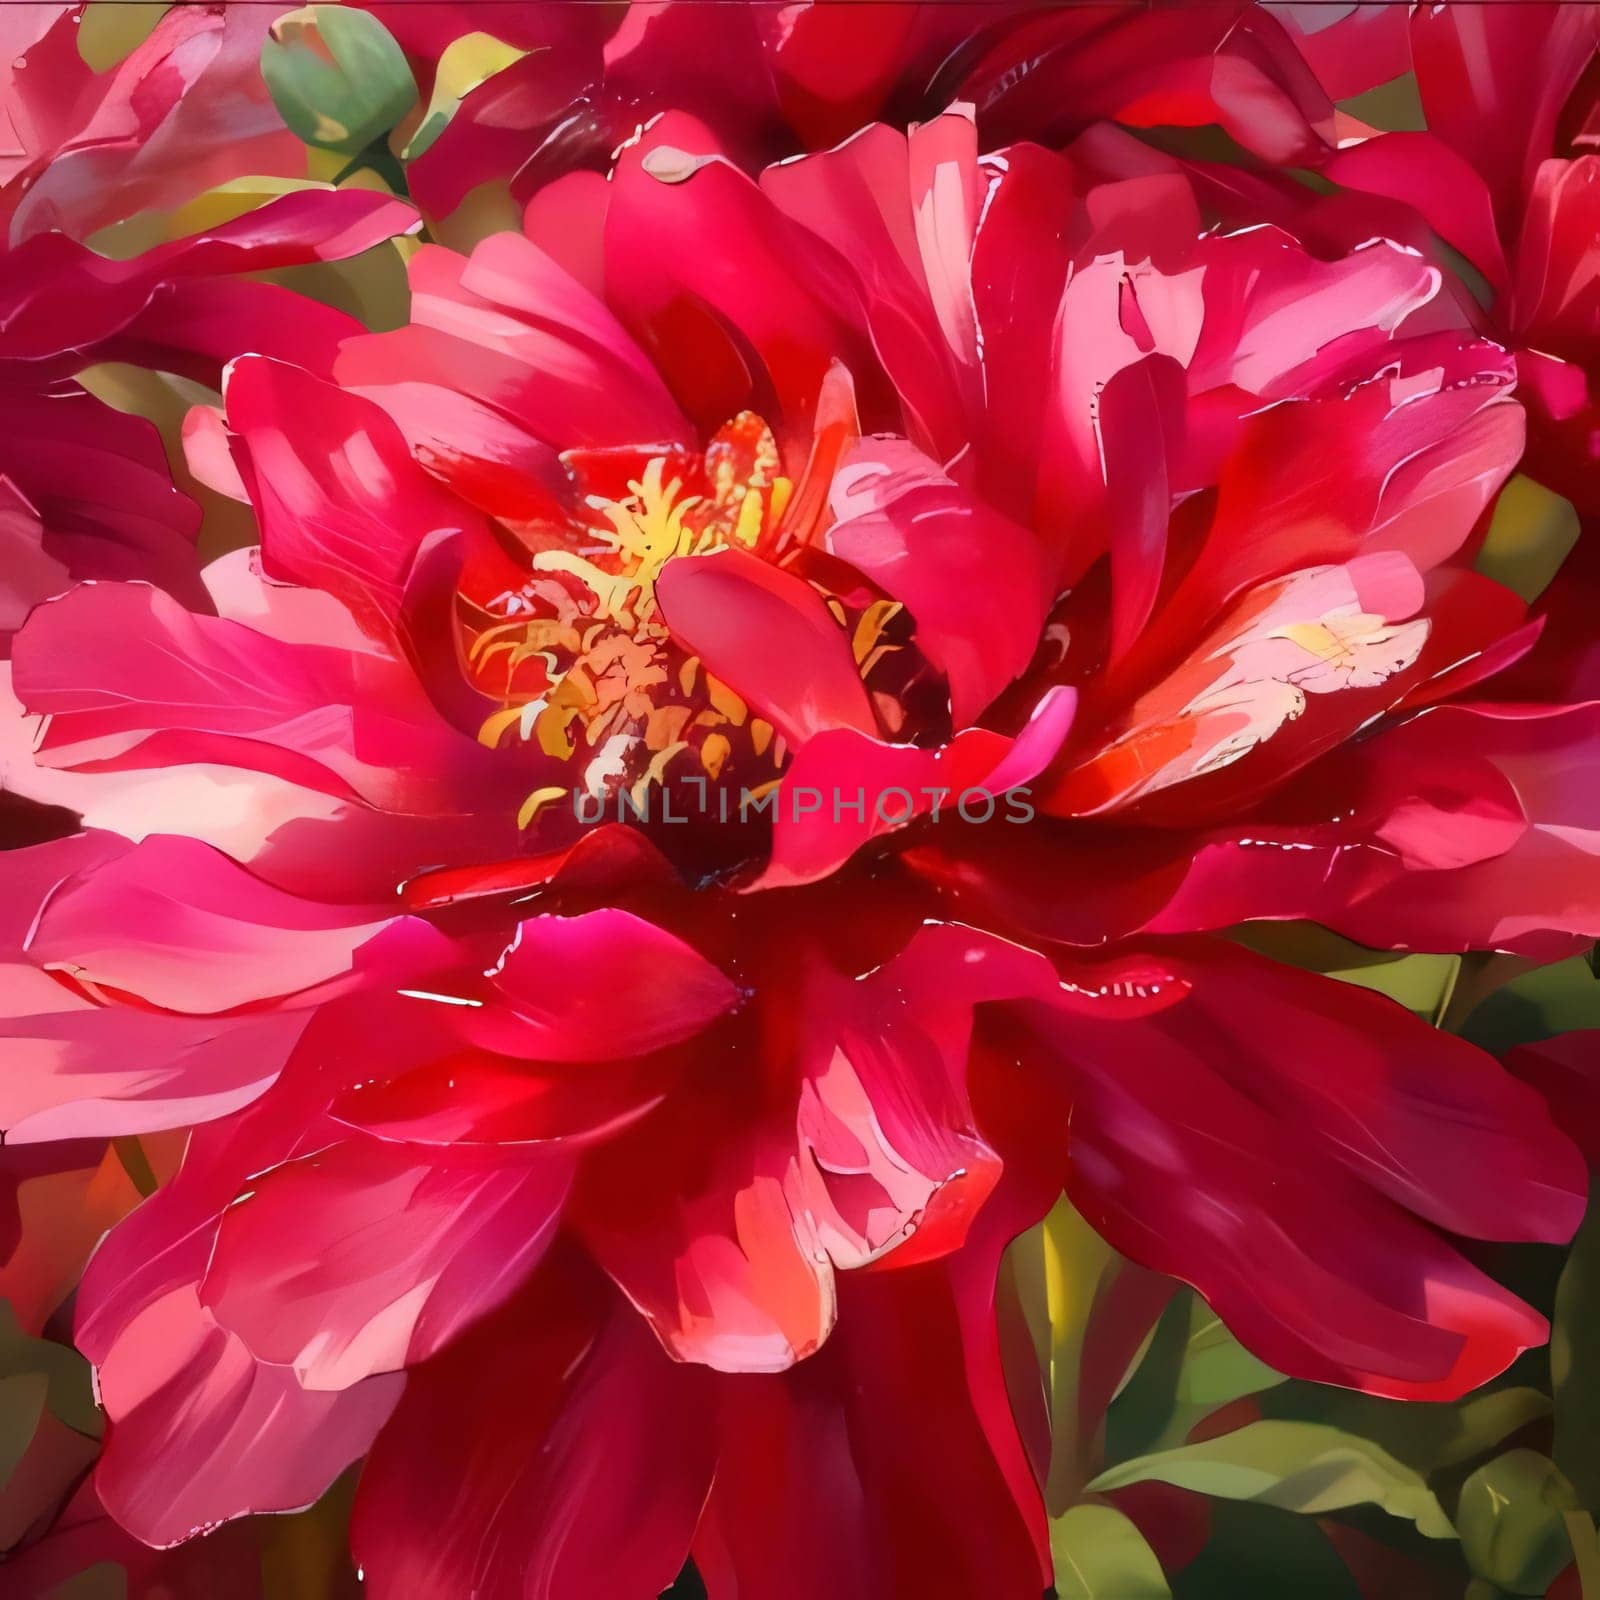 Illustration of a red flower with petals in close-up painted with watercolor paints. Flowering flowers, a symbol of spring, new life. A joyful time of nature awakening to life.